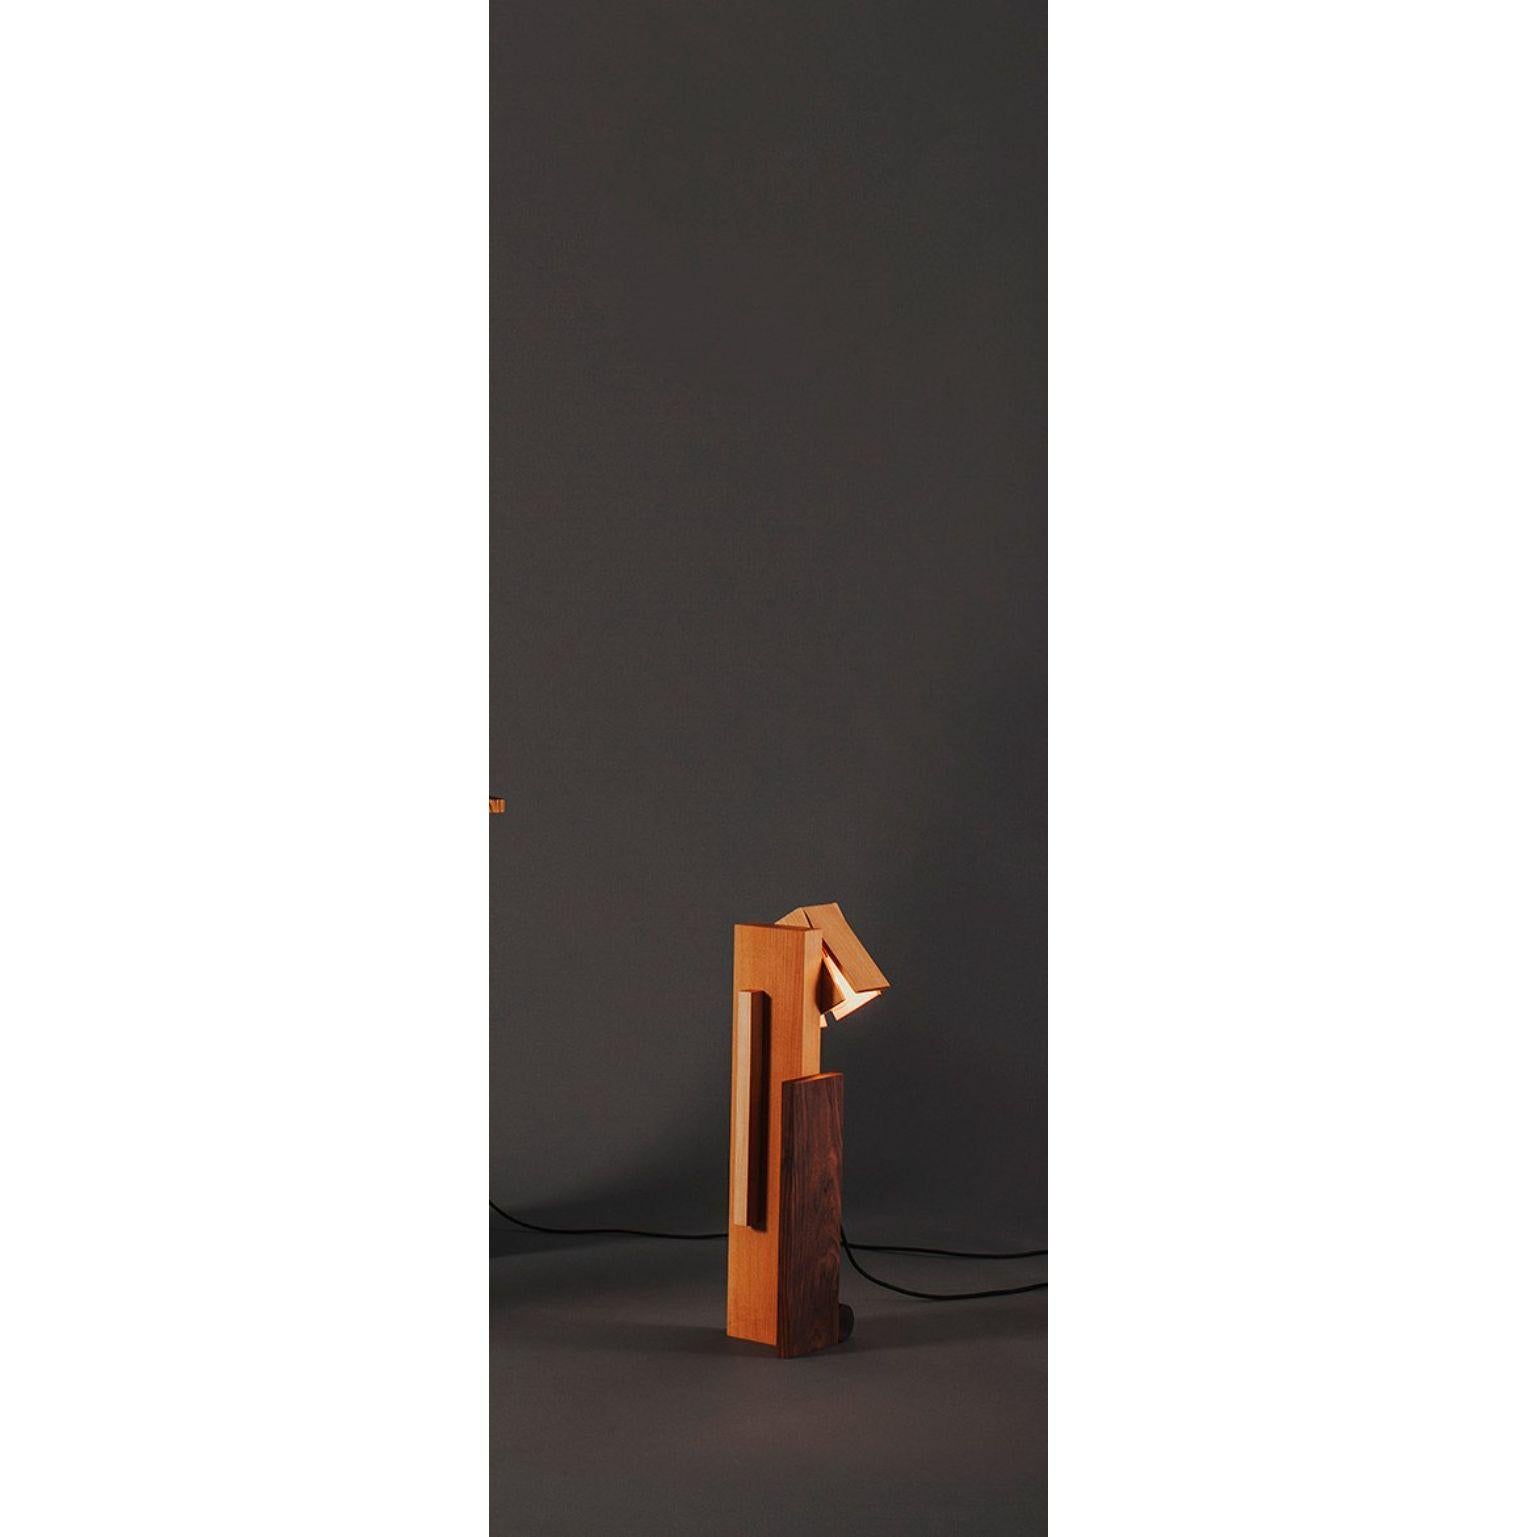 Small Formica floor lamp by Owl
Dimensions: H 45 x L 15 x W 15 cm
Materials: Solid wood, Colourful Formica

Formica is a series in which material defines form. The collection combines solid wood with colourful Formica, creating a furniture